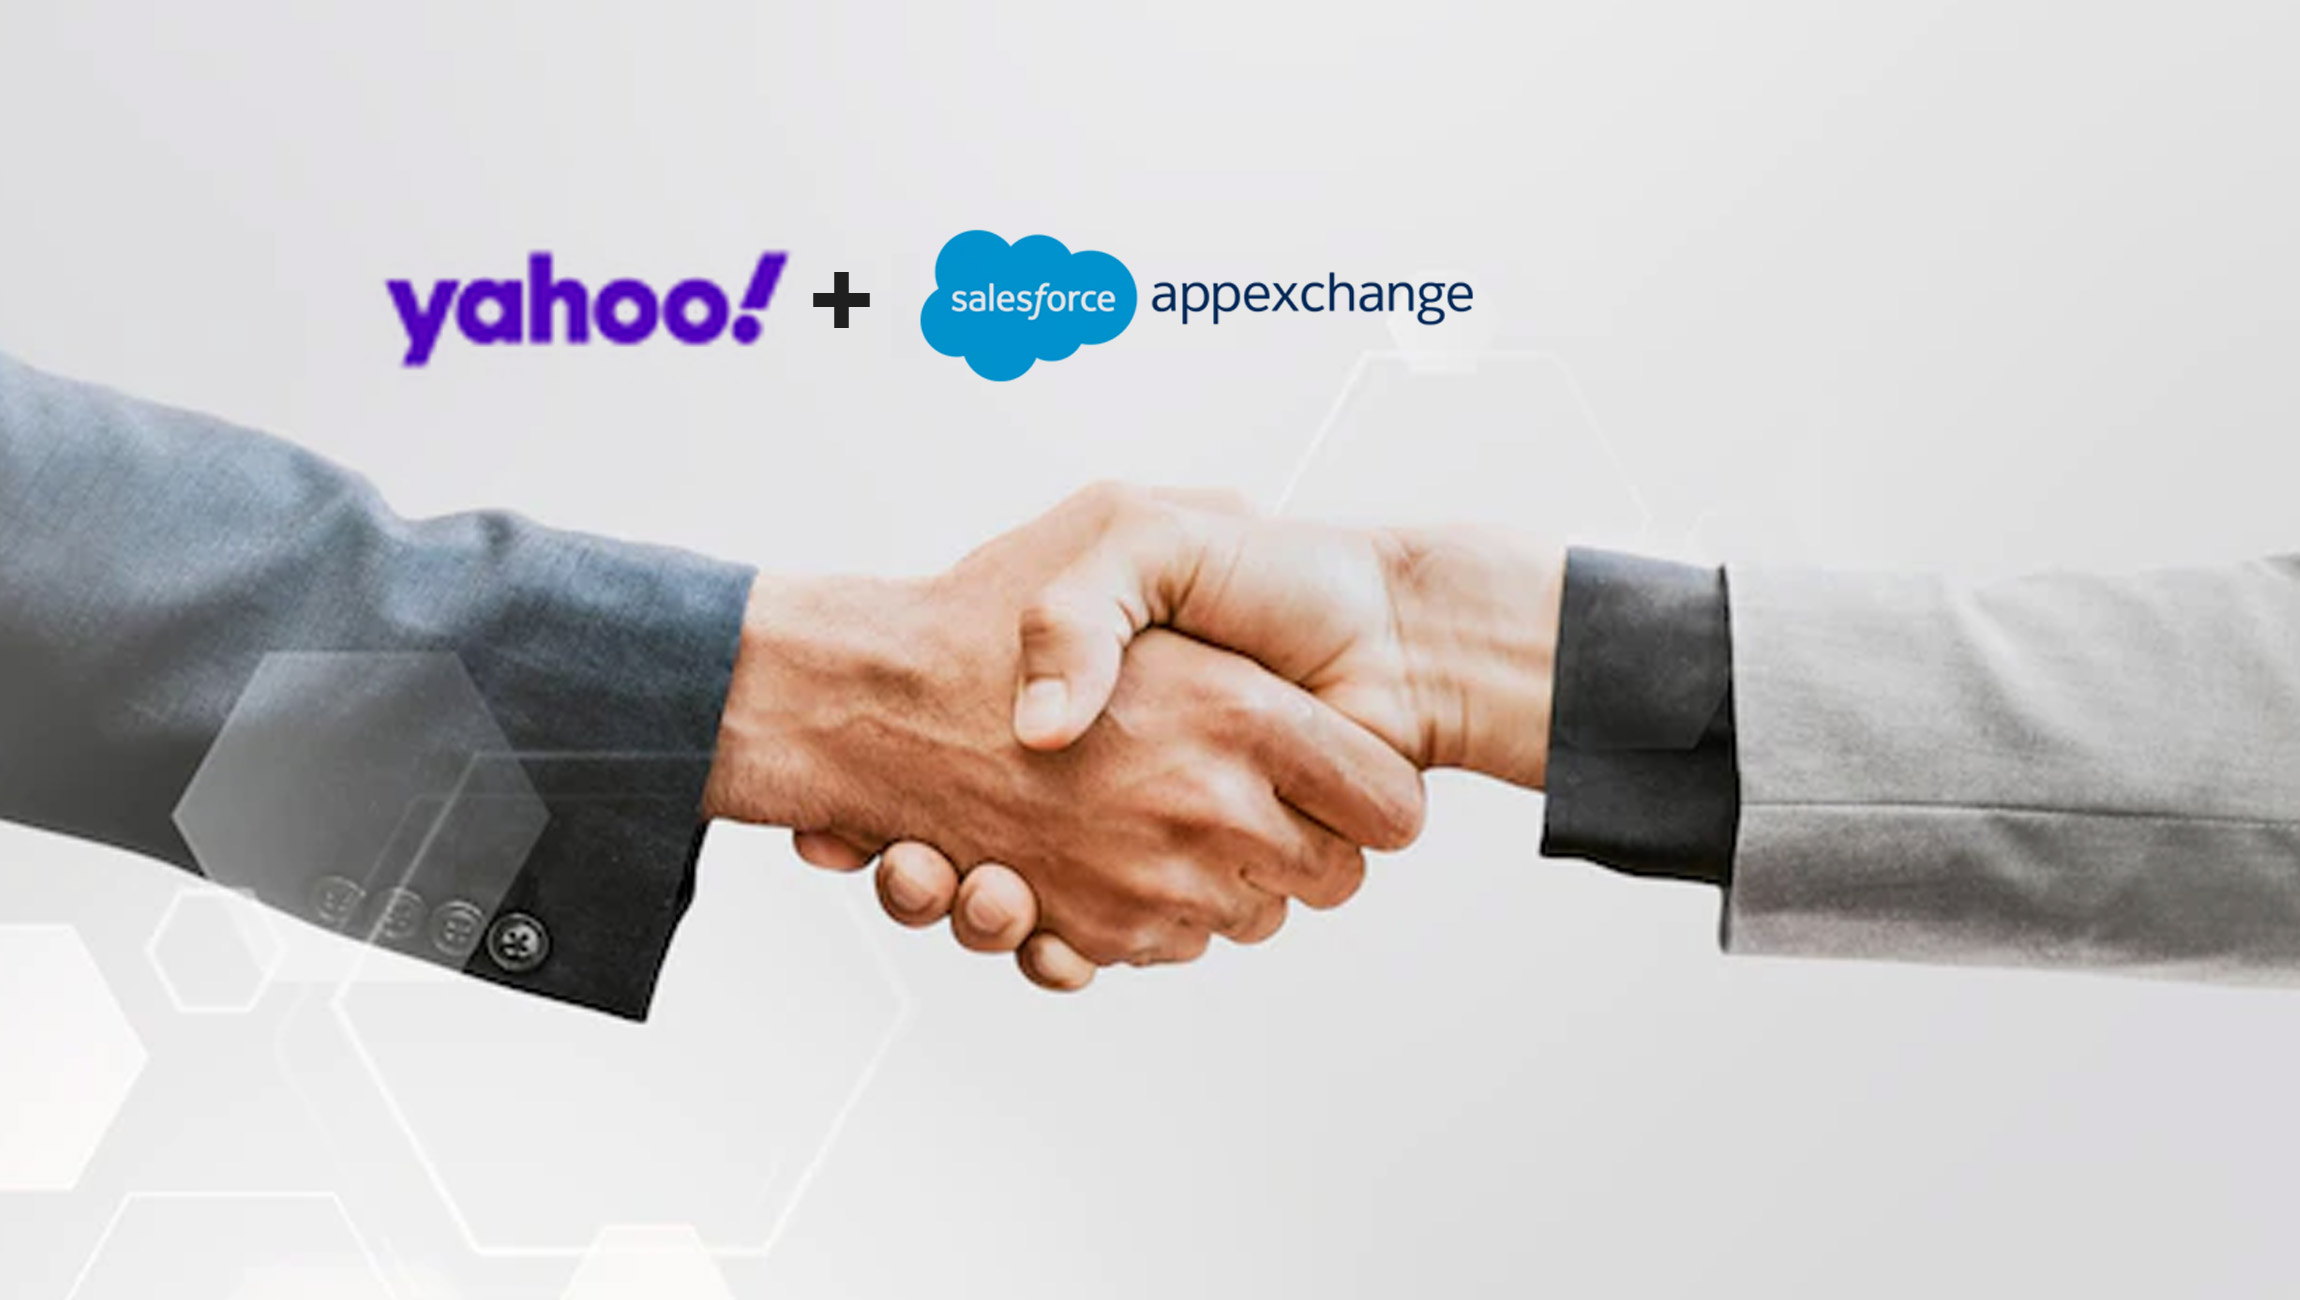 Yahoo Joins Salesforce AppExchange Enterprise Cloud Marketplace to Deliver Personalized Experiences at Scale for Consumer Brands 1